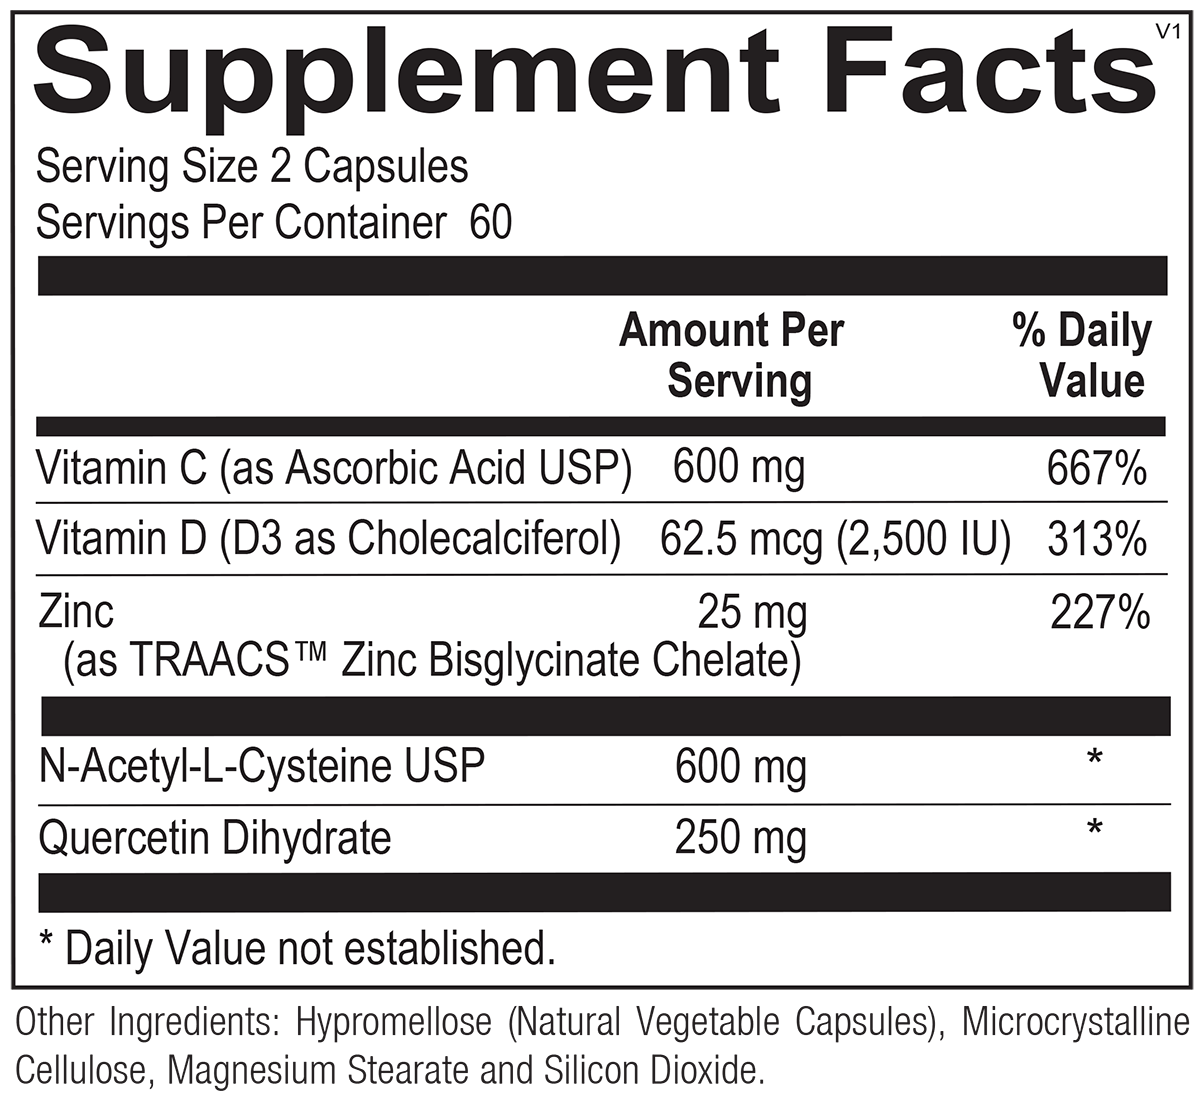 Orthomune Supplement Facts. Image of the supplement facts label on the bottle.